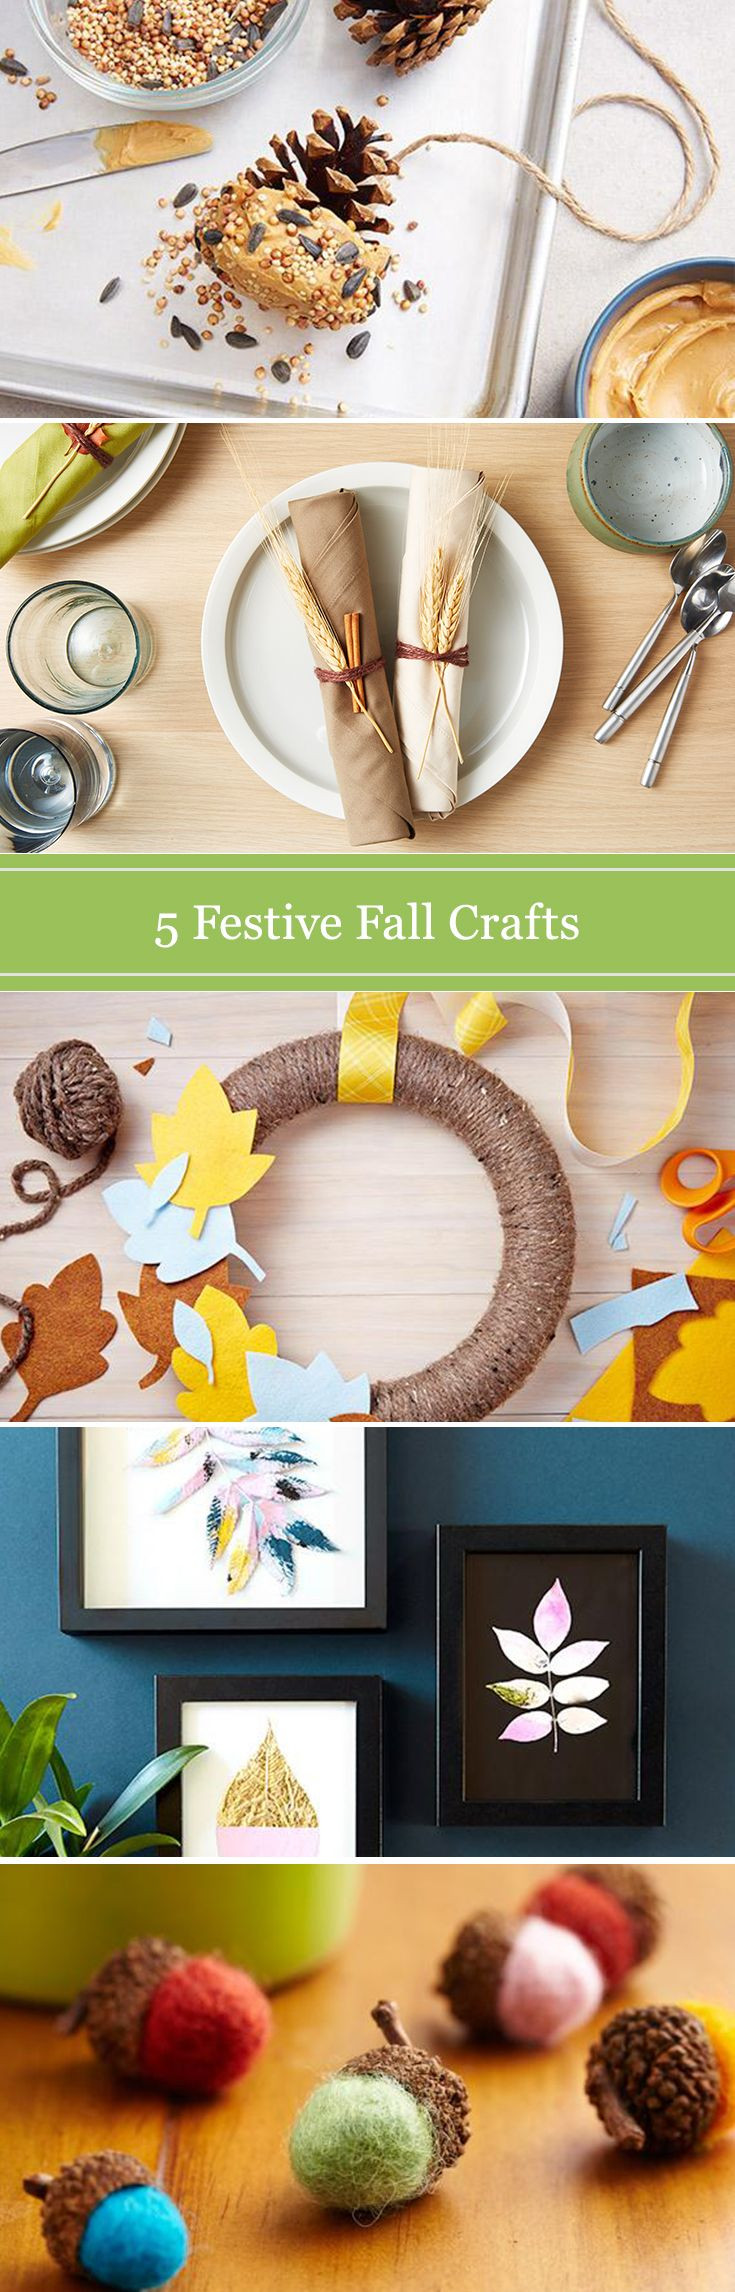 Craft Ideas For Adults
 51 best Craft Ideas for Adults images on Pinterest